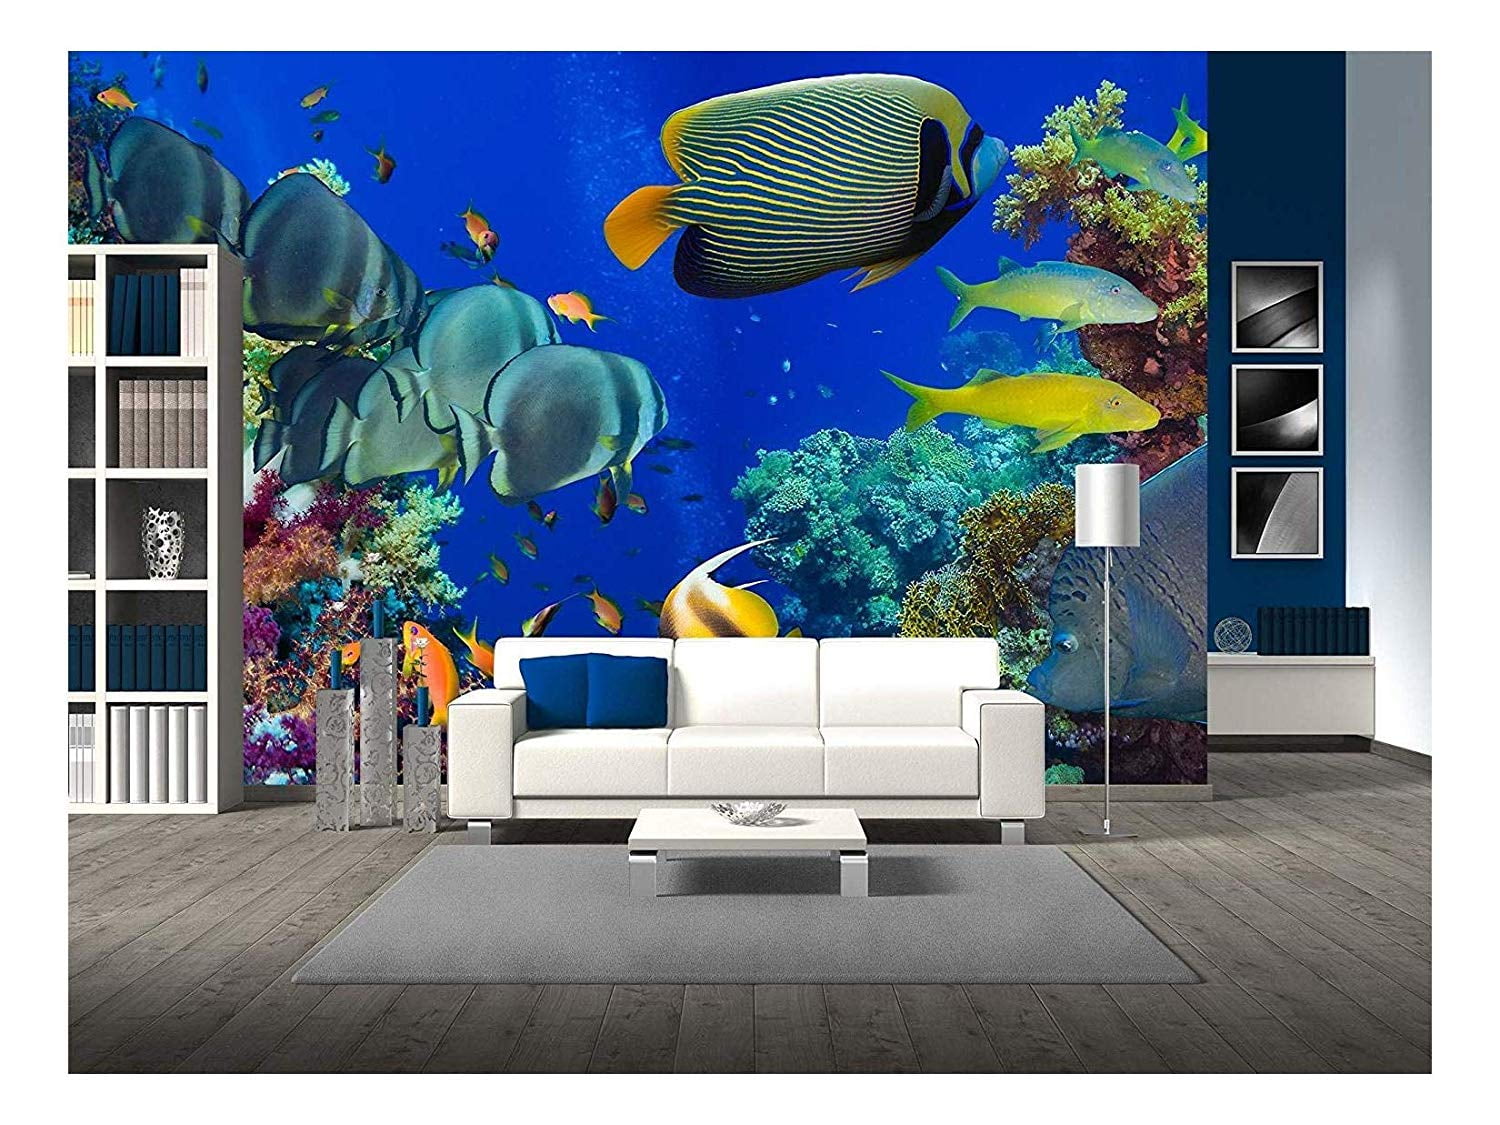 Pretty Pattern Wall Mural Decal Artistic Peel and Stick Cool Underwater Wall Cling Lion Fish Removable Wallpaper Modern Home Decor